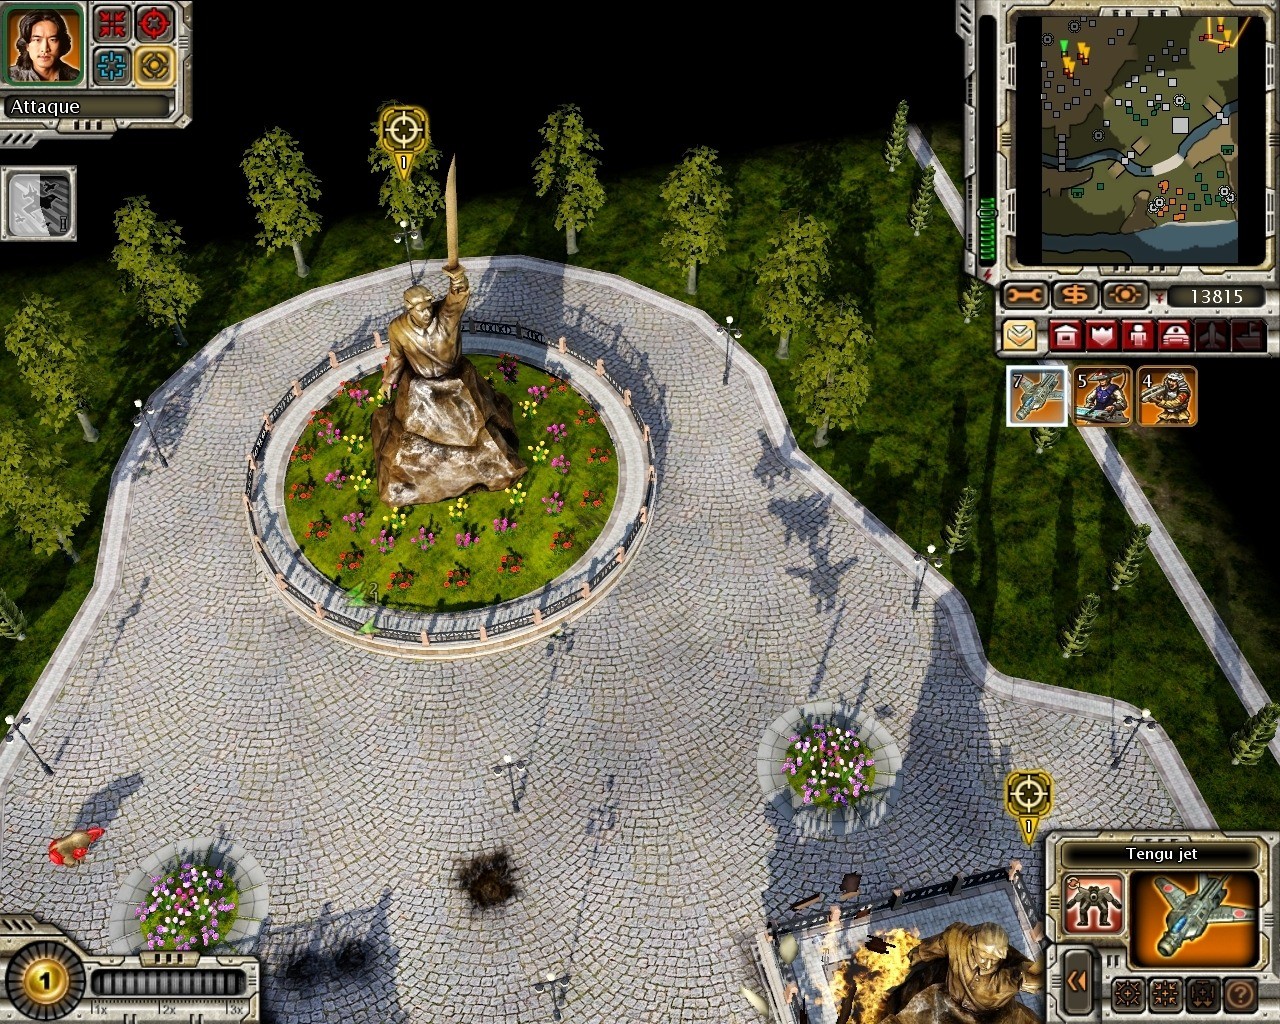 command and conquer generals zero hour key